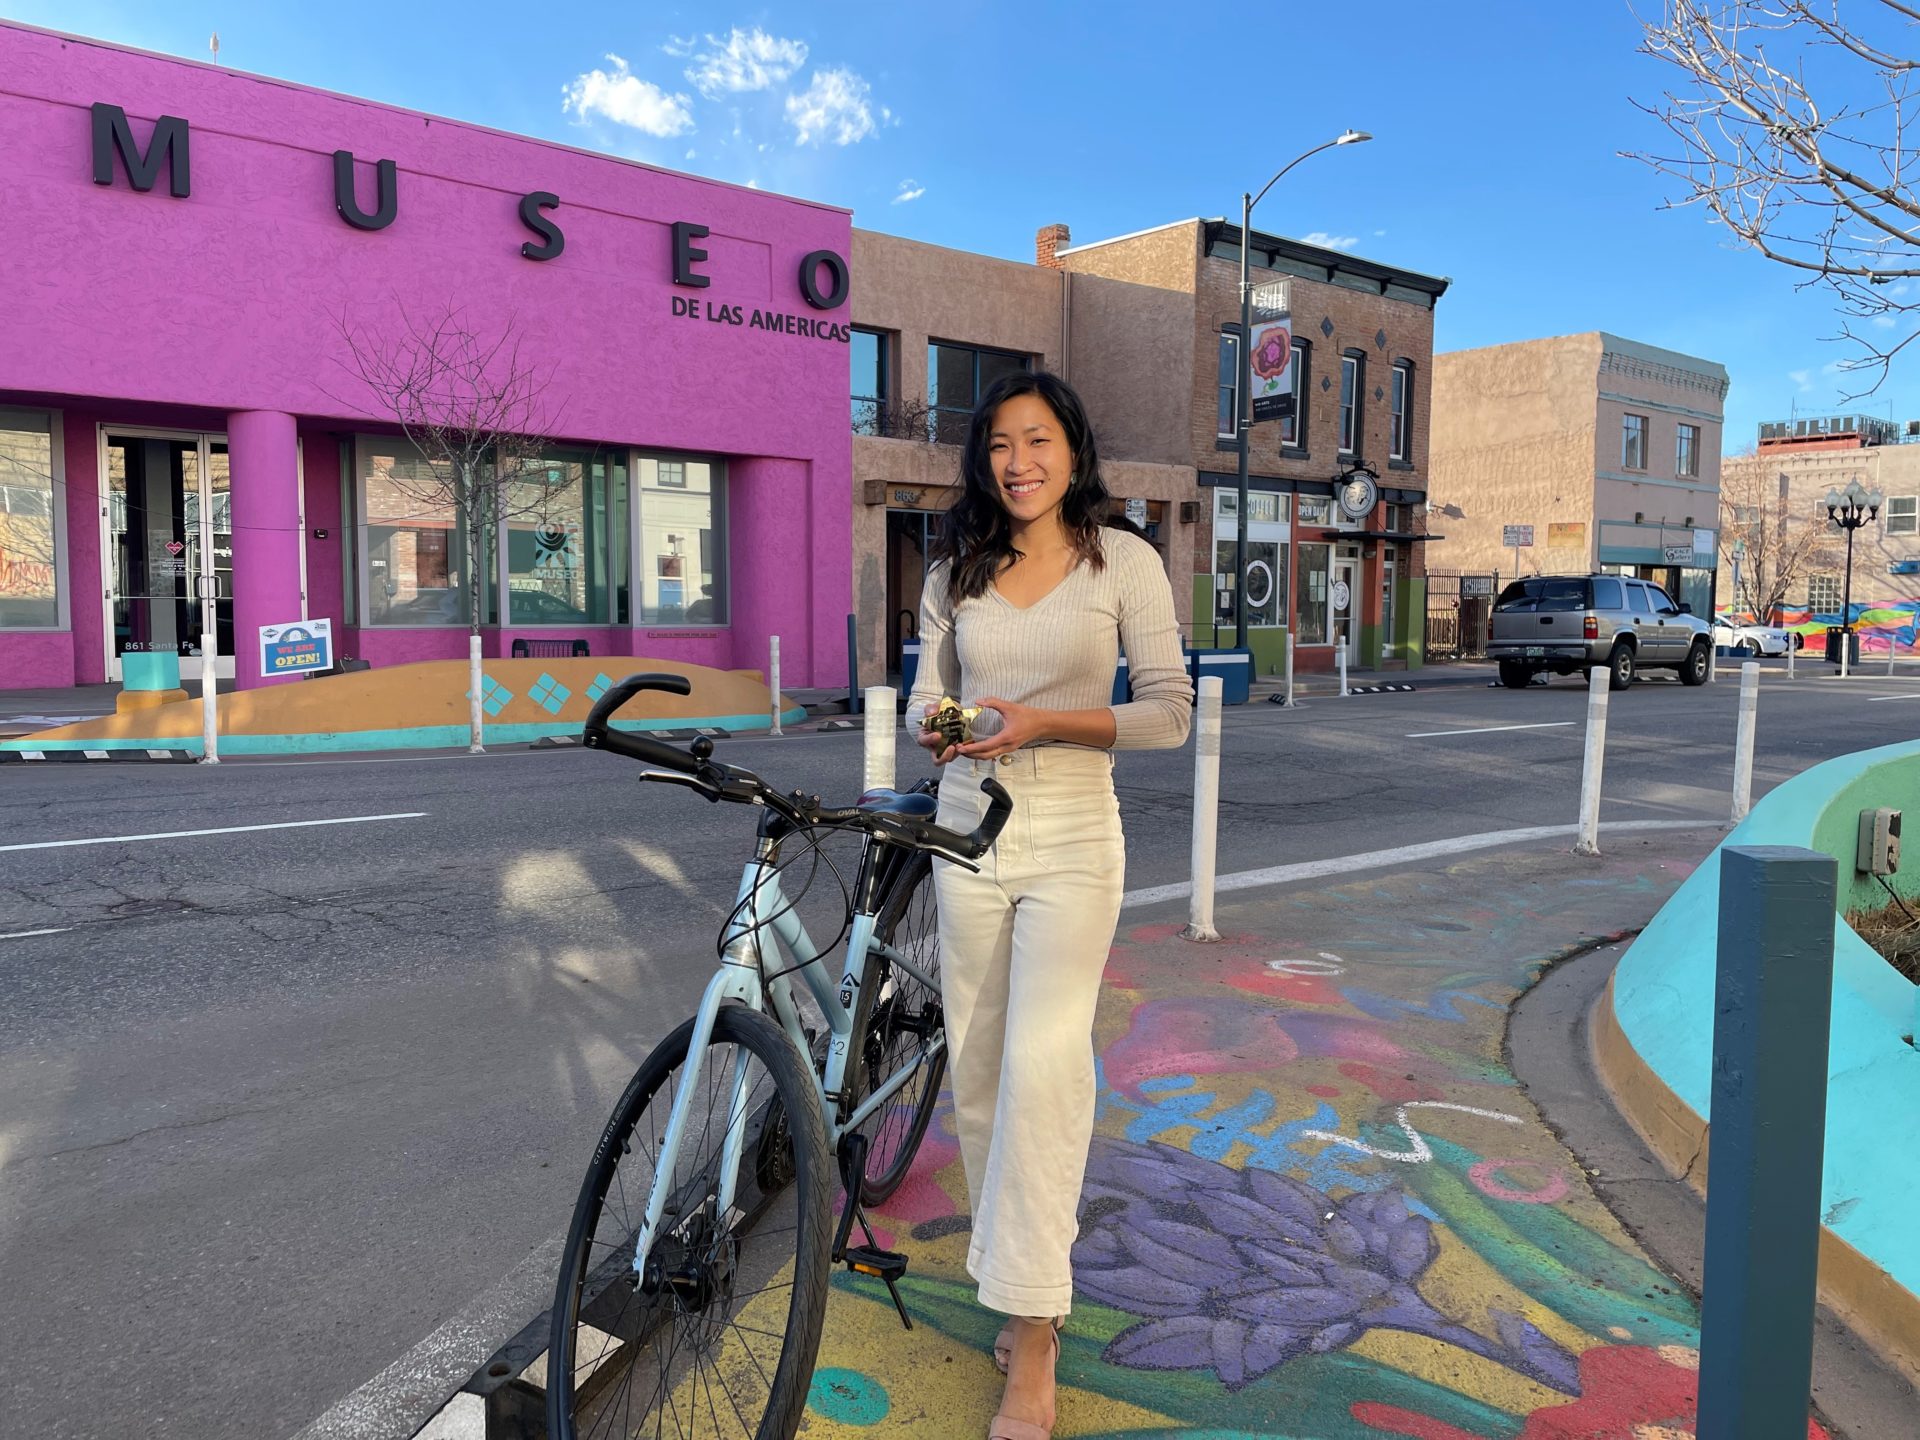 A woman stands with her bike next to her in front of a street, with a bright pink building in the background.